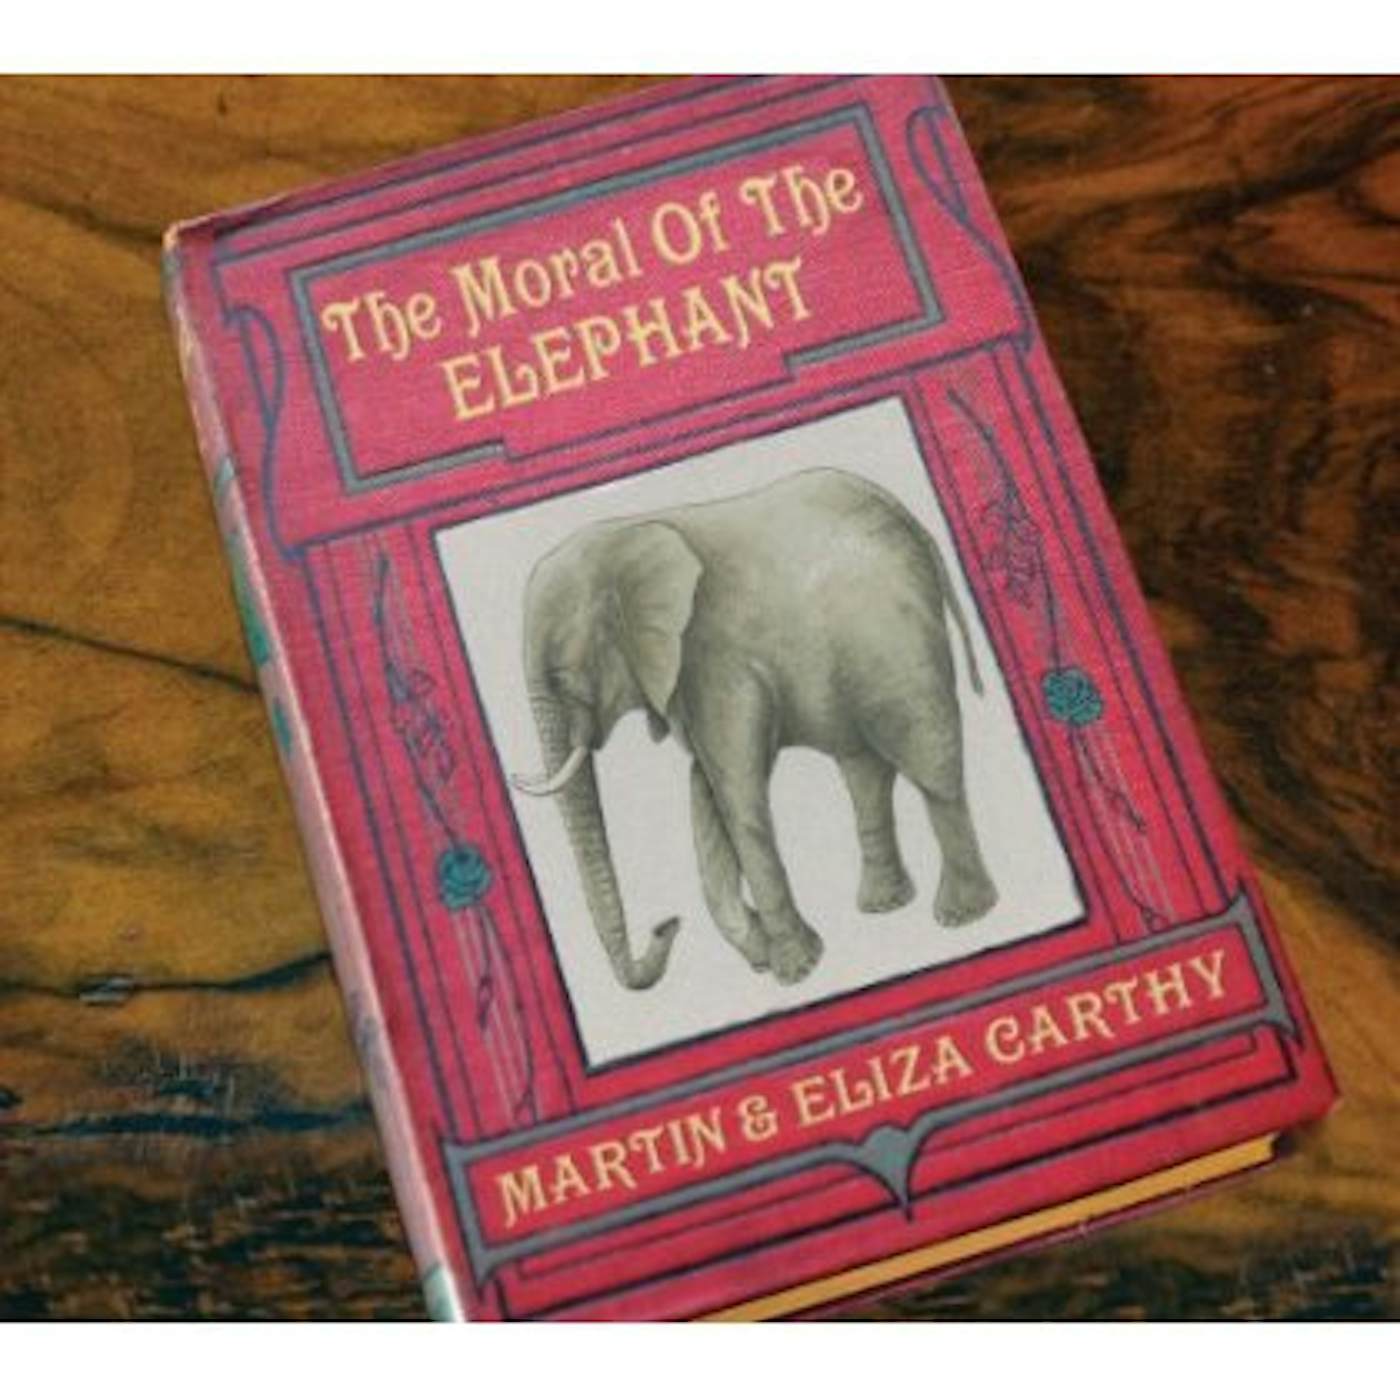 Martin Carthy MORAL OF THE ELEPHANT CD